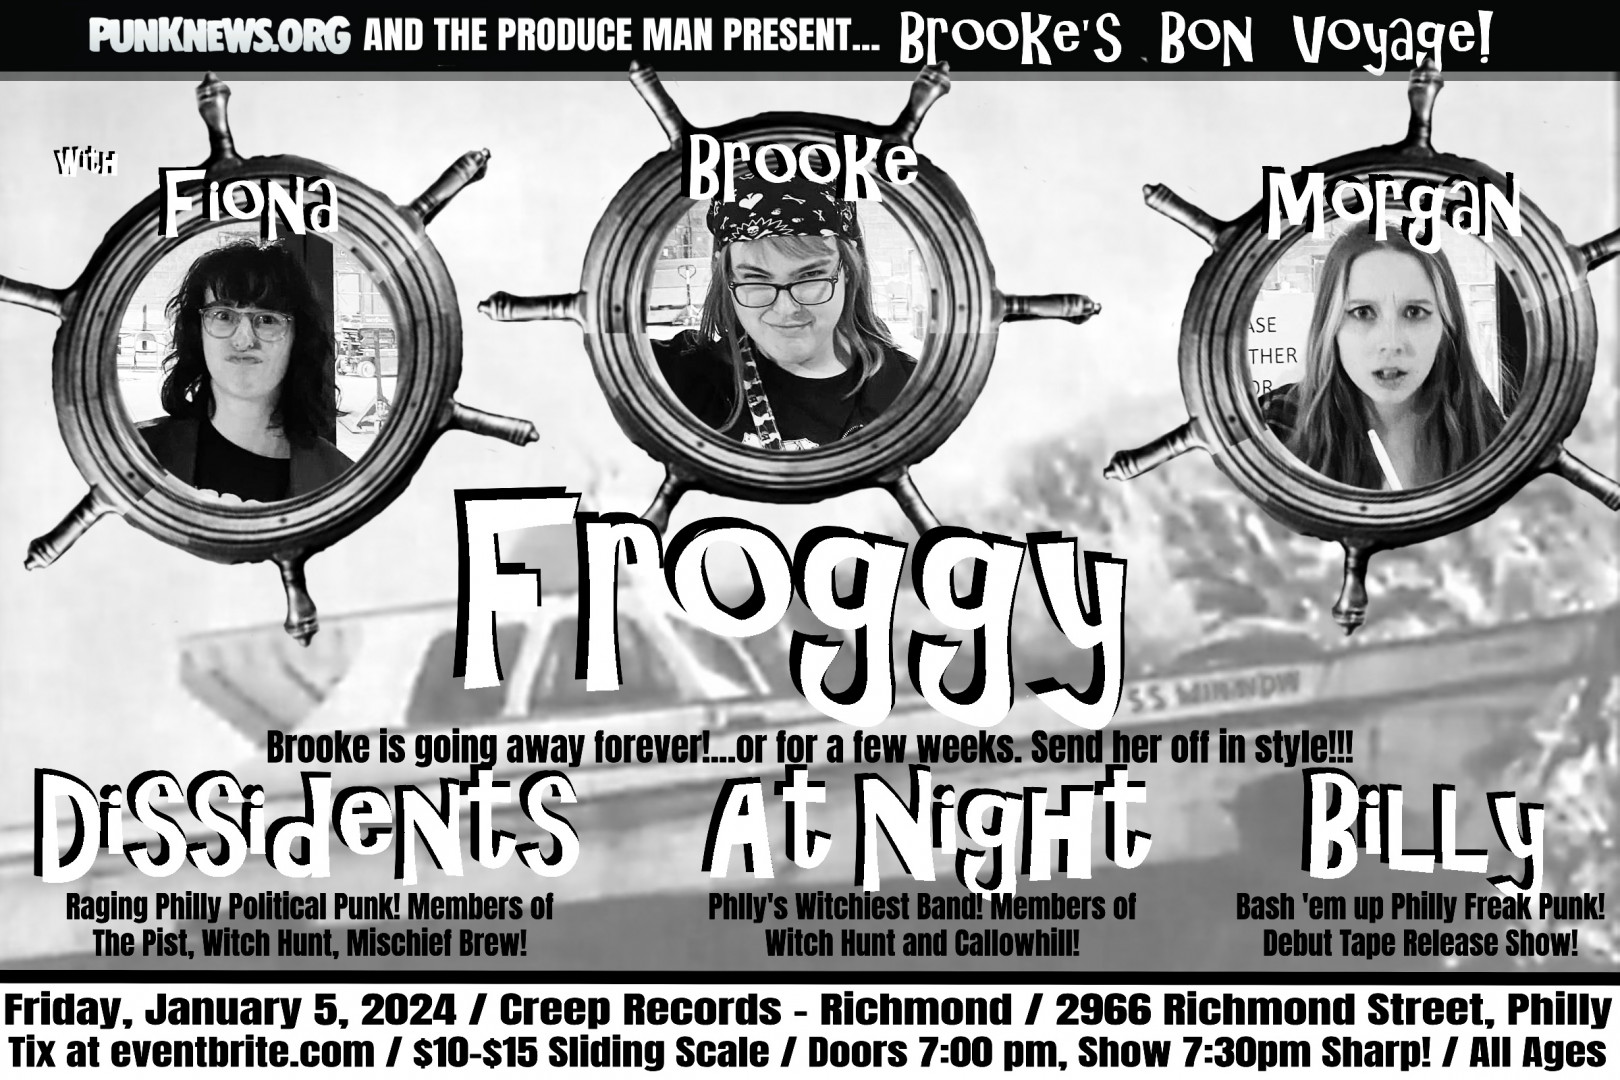 Froggy, Dissidents, At Night, Billy to play Brooke's Bon Voyage in Philly on January 5!